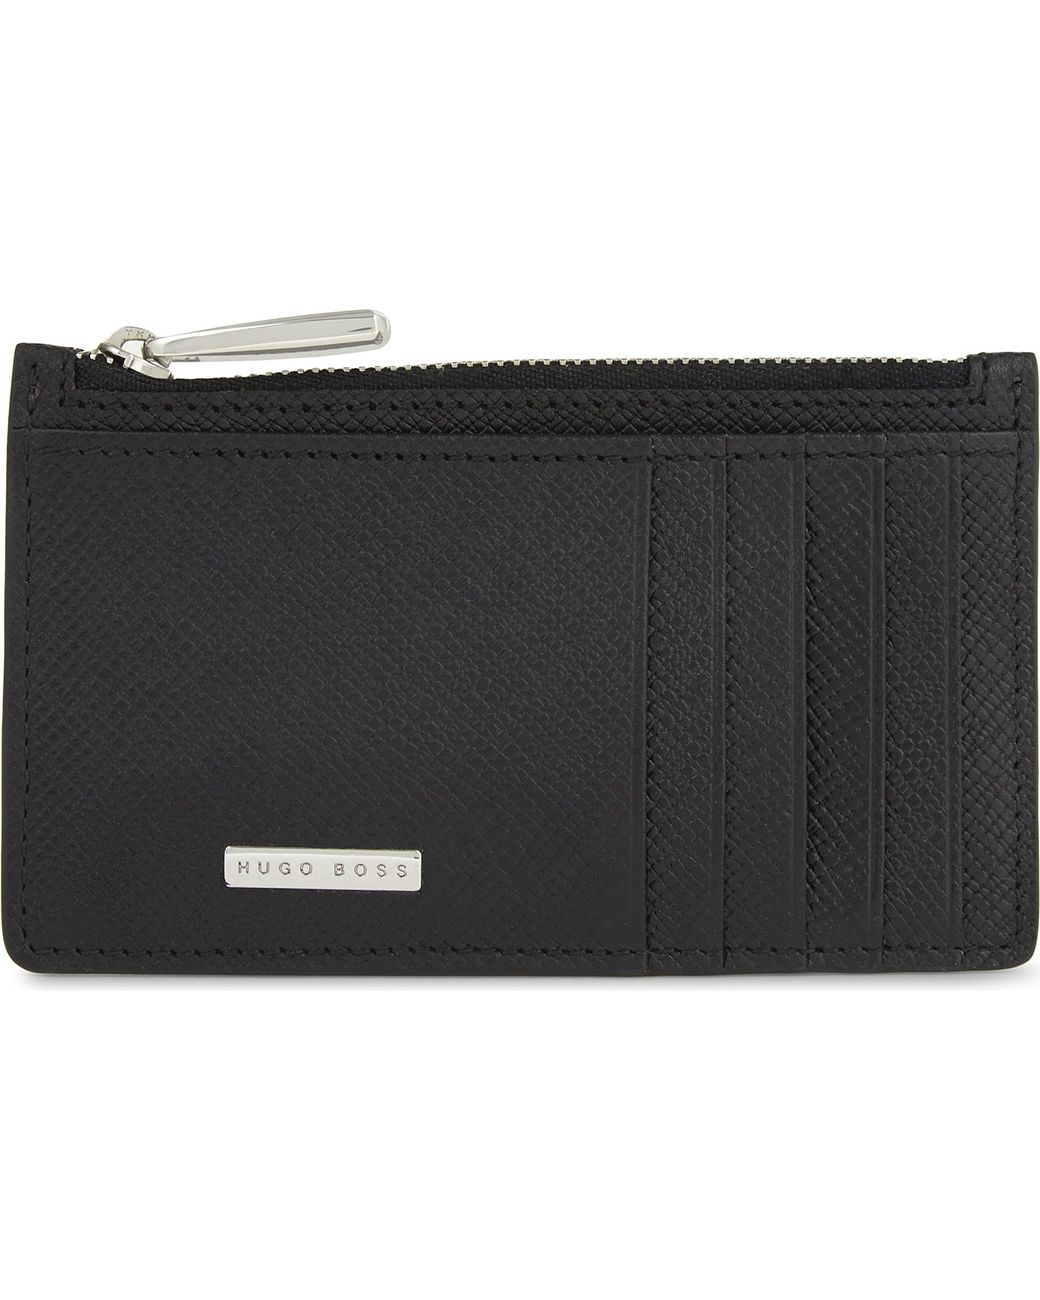 BOSS by HUGO BOSS Signature Leather Zipped Card Holder in Black for Men |  Lyst